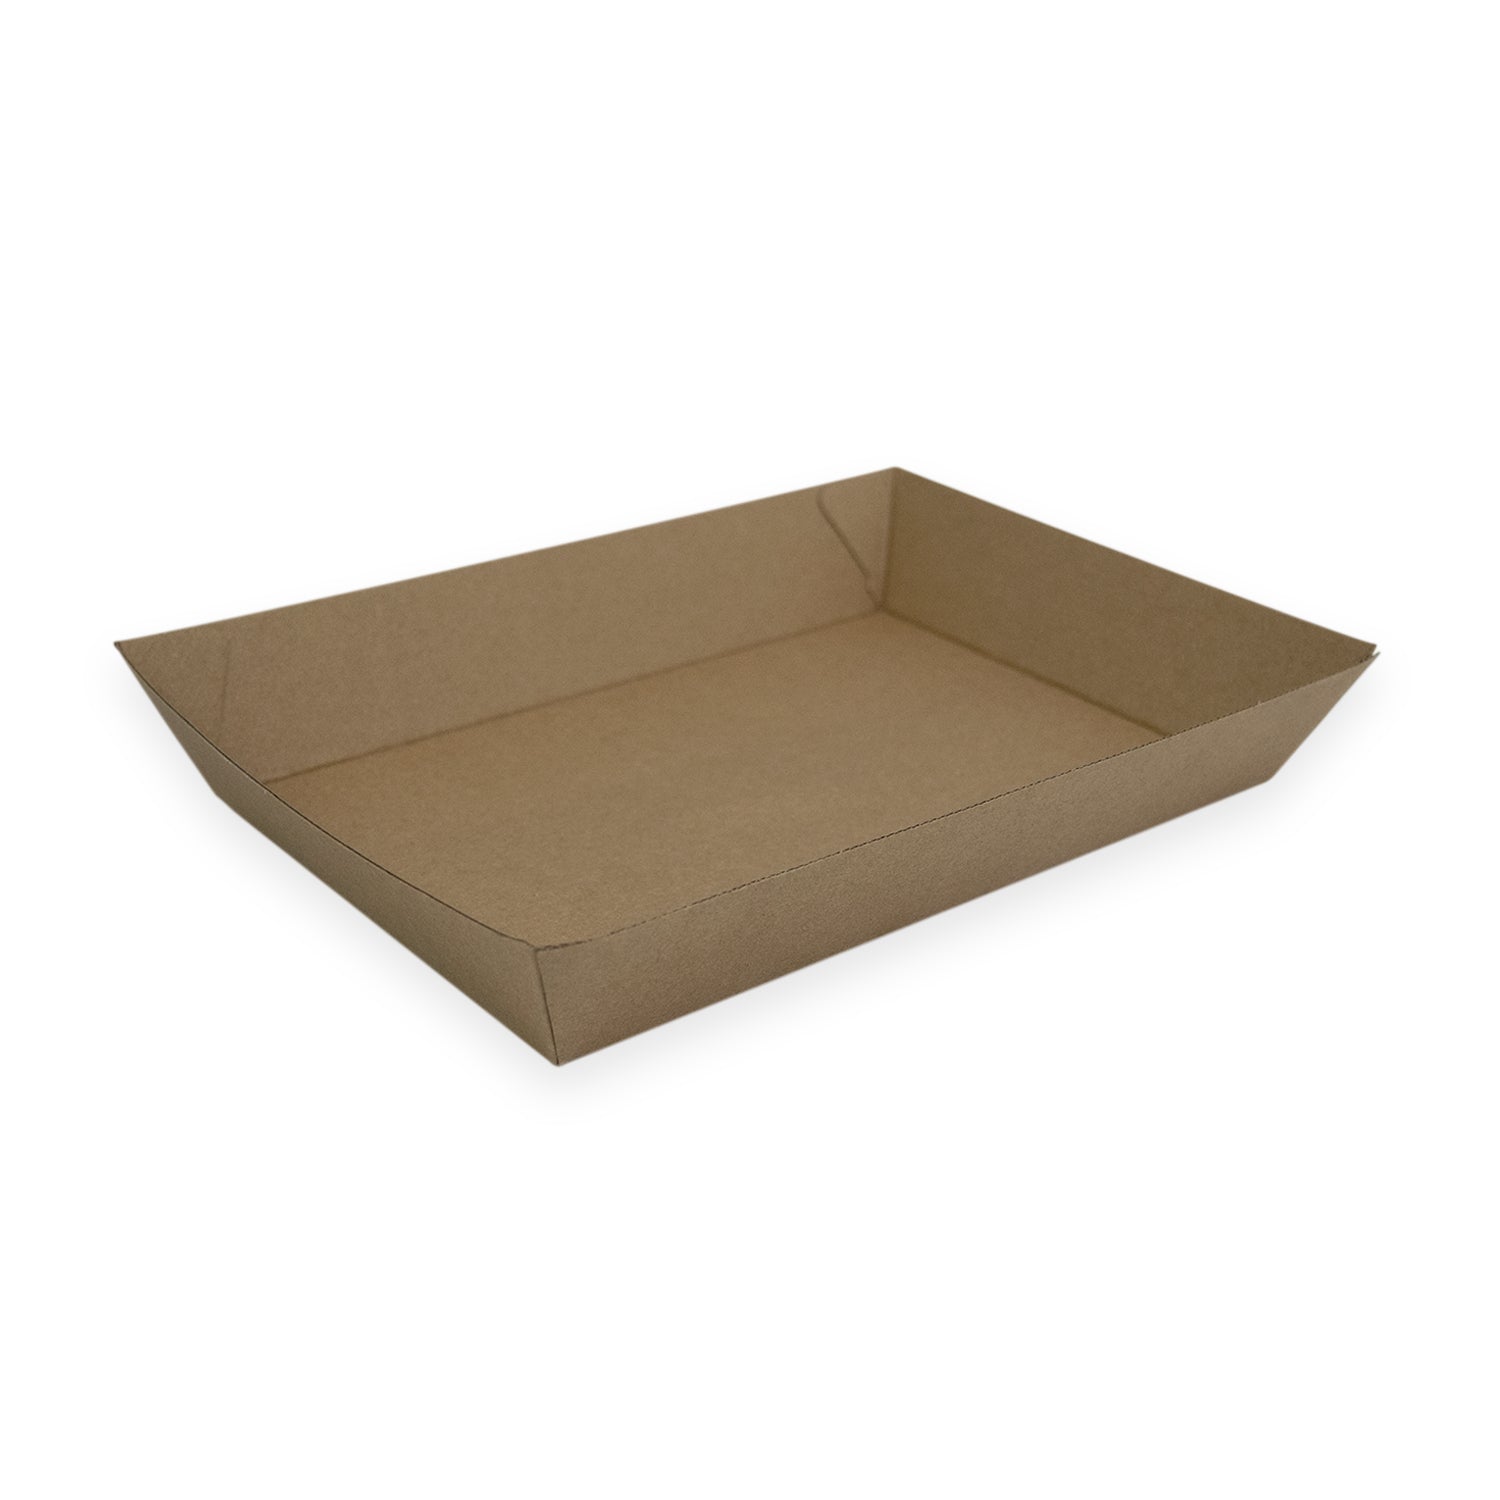 Sustain Sustain Food Tray #4 Brown - CT/240 Disposable Food Packaging  